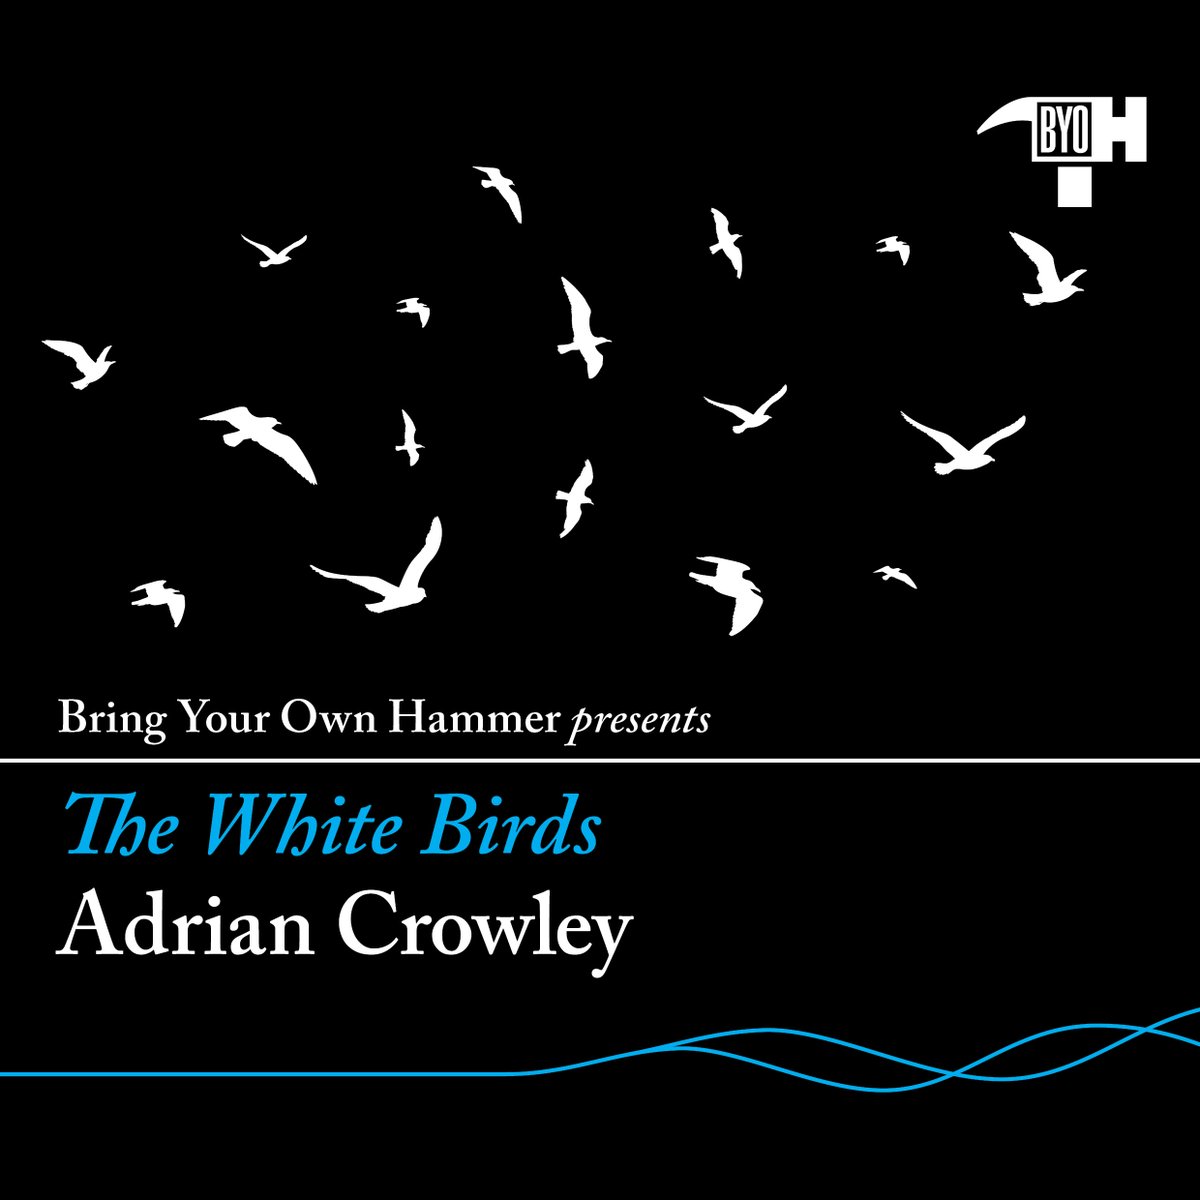 New single on its way, 3 May! Taking a journey to Howth (circa 1891) with @MrAdrianCrowley (and the ghosts of W.B. Yeats and Maud Gonne) to see The White Birds. @DimpleDiscs